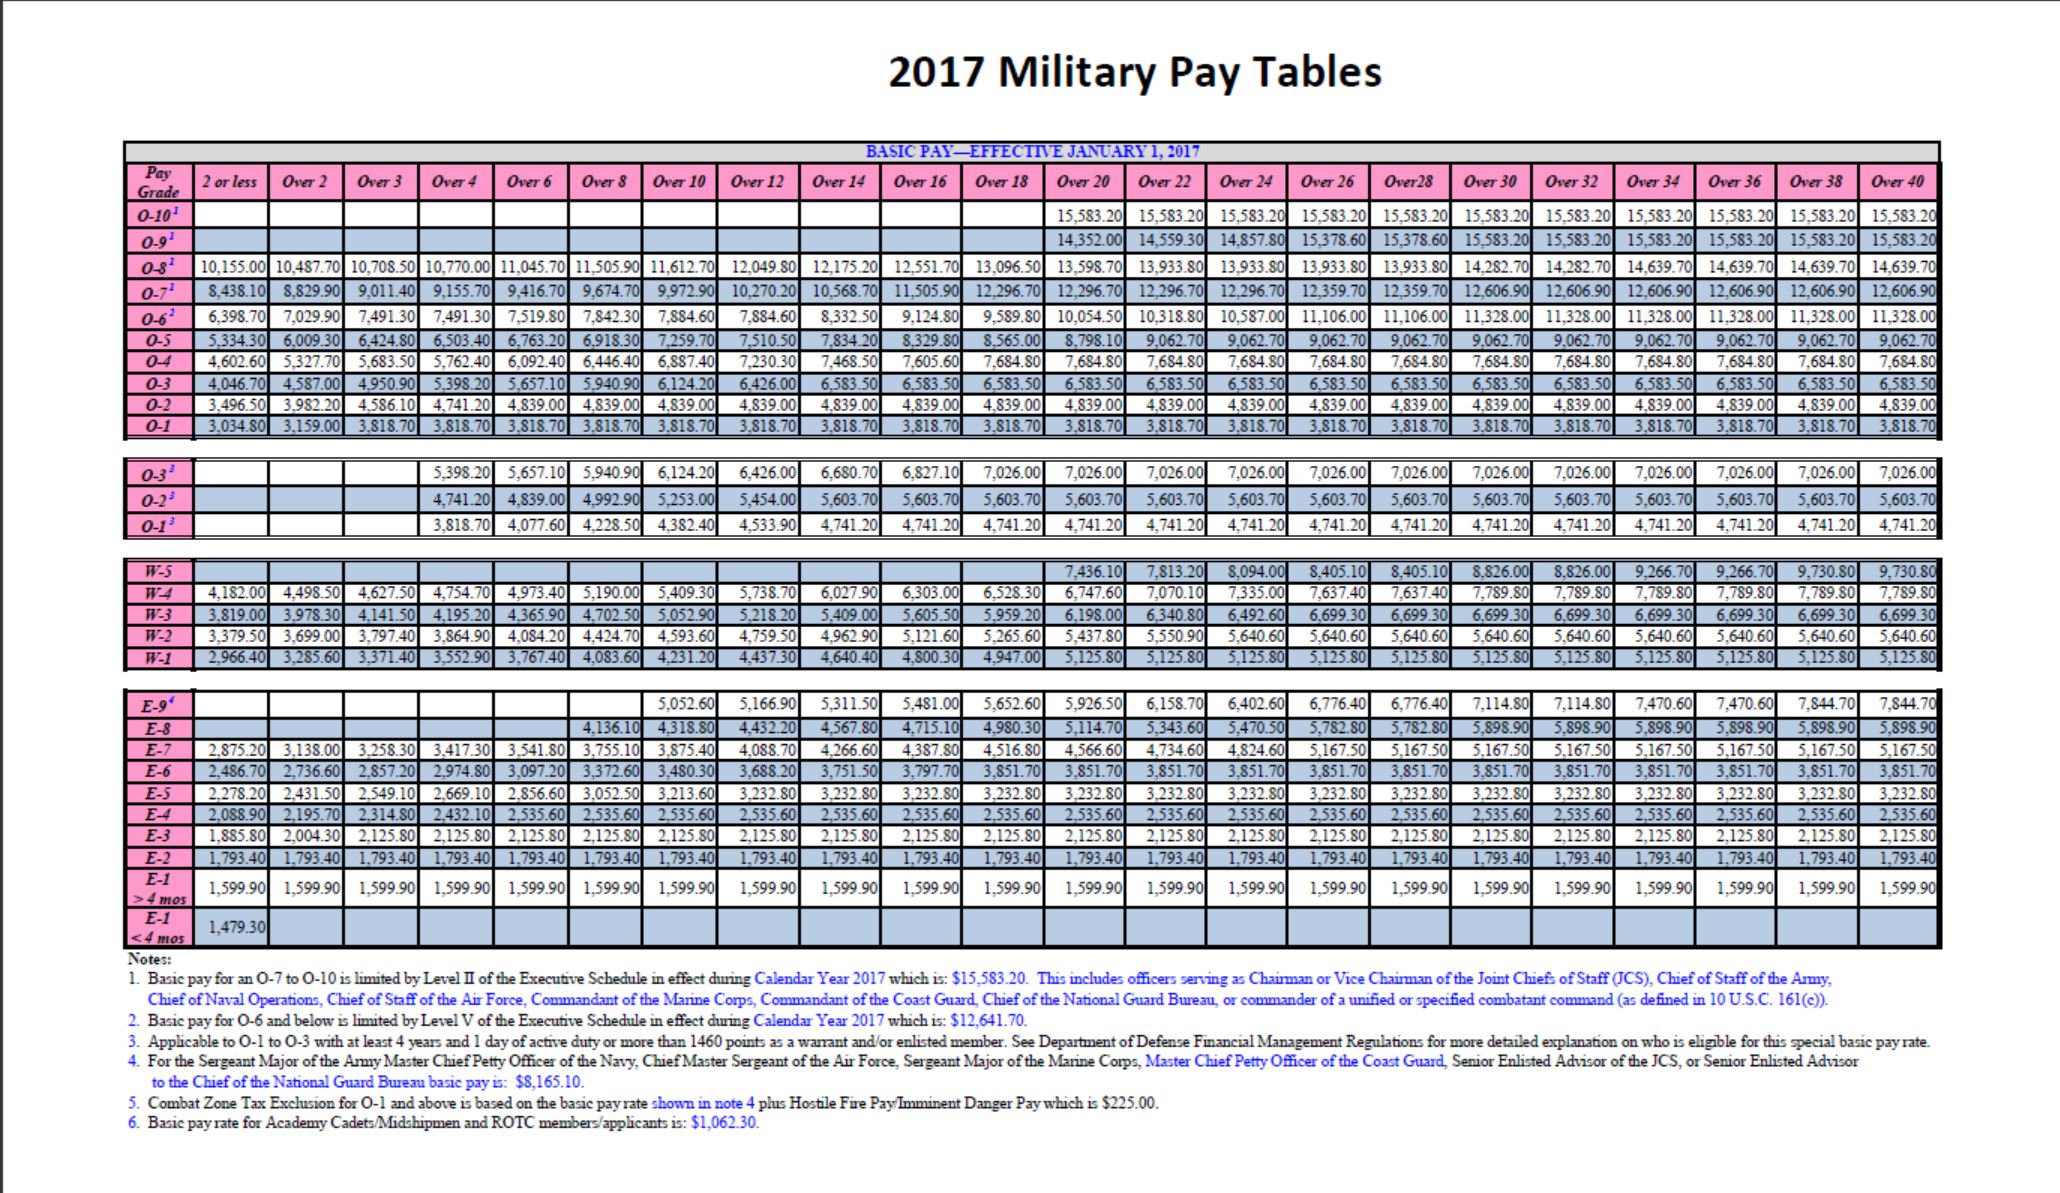 Mypay Military Pay Chart